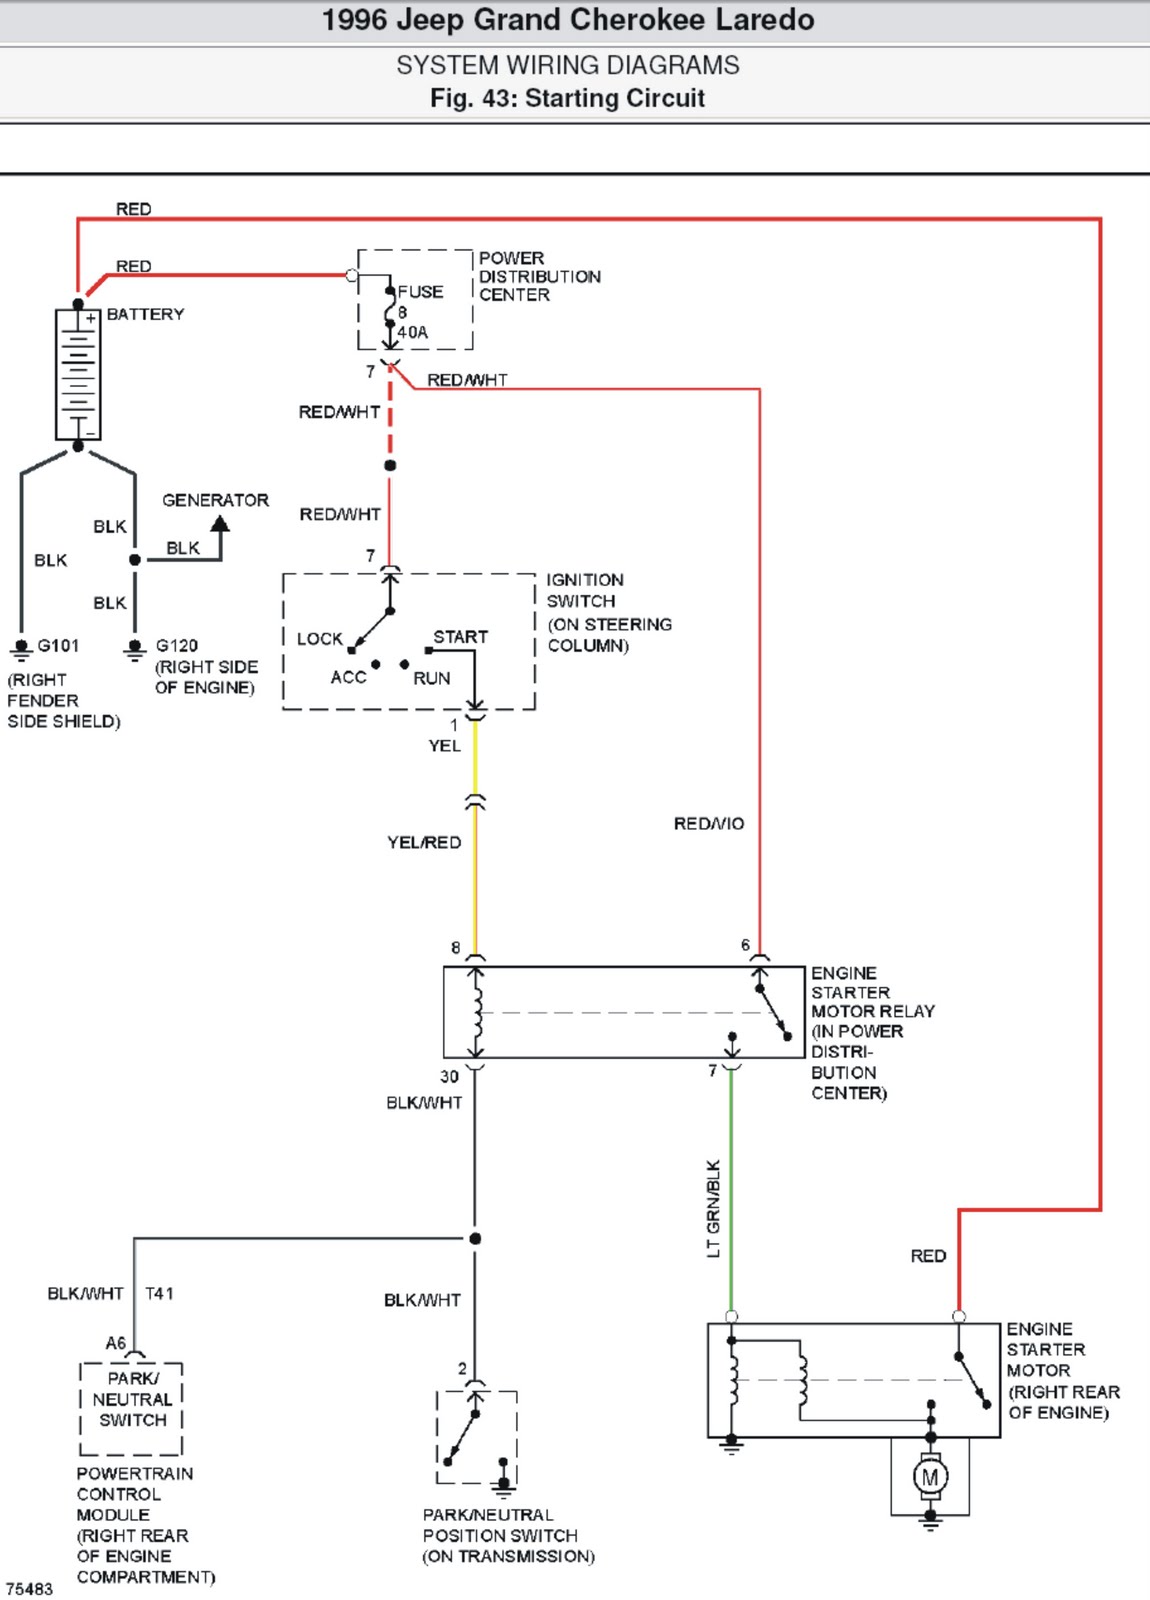 1996 Jeep Grand Cherokee Stereo Wiring Diagram from 2.bp.blogspot.com